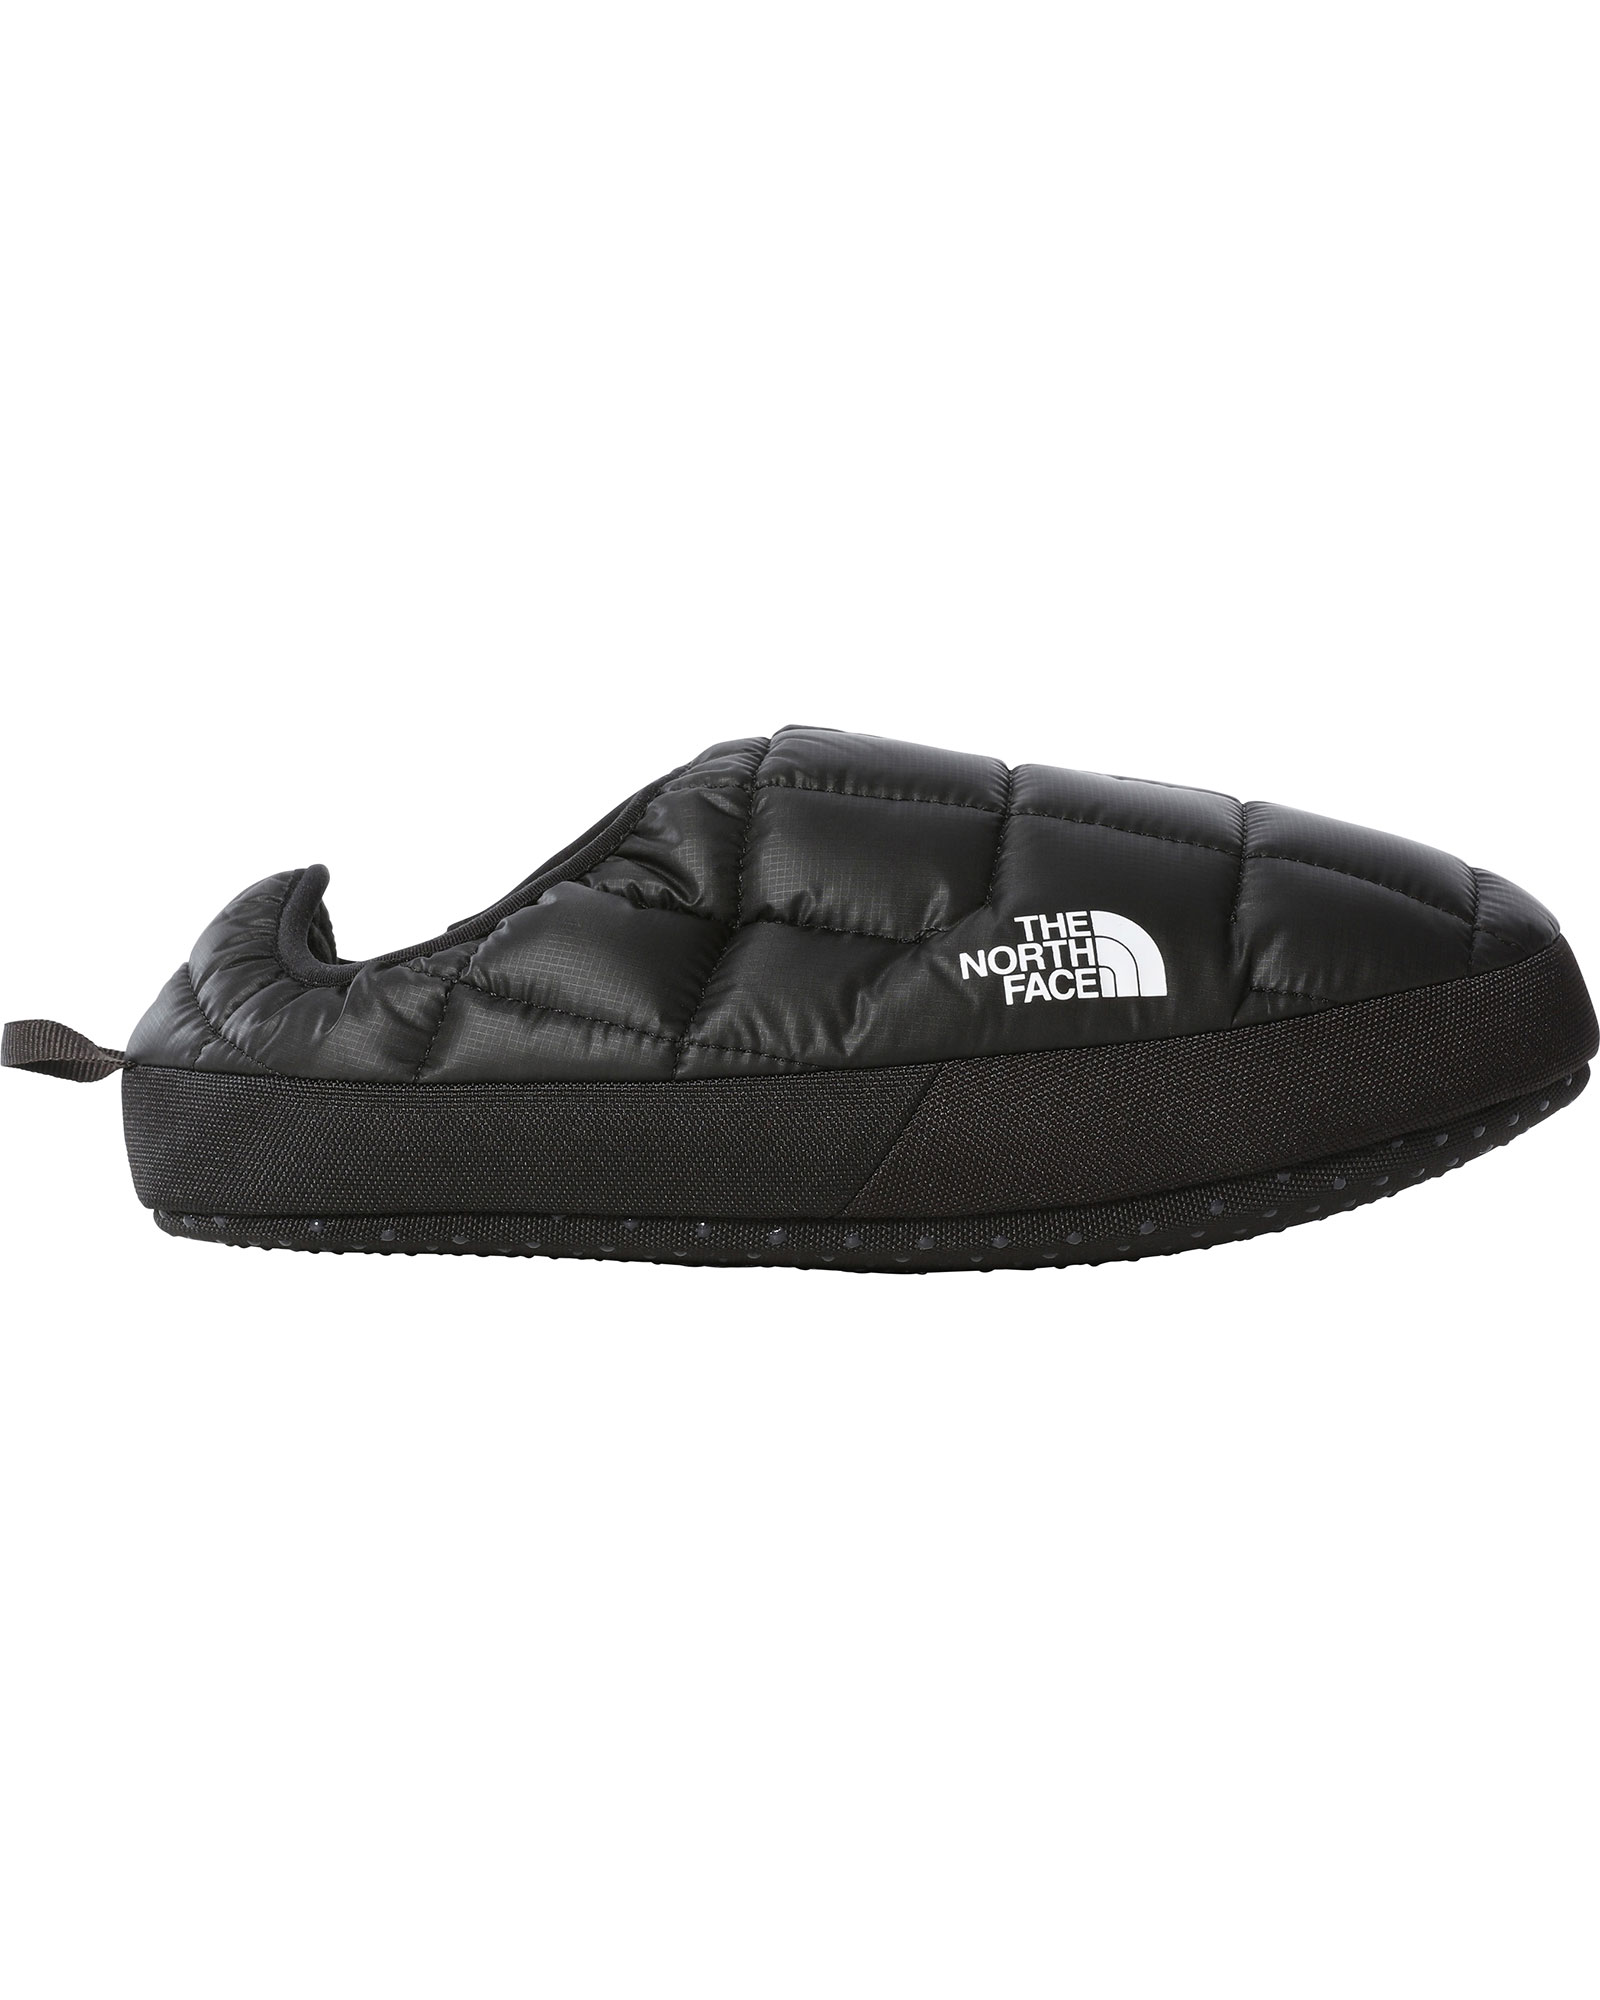 The North Face Women’s ThermoBall V Mules - TNF Black/TNF Black XS